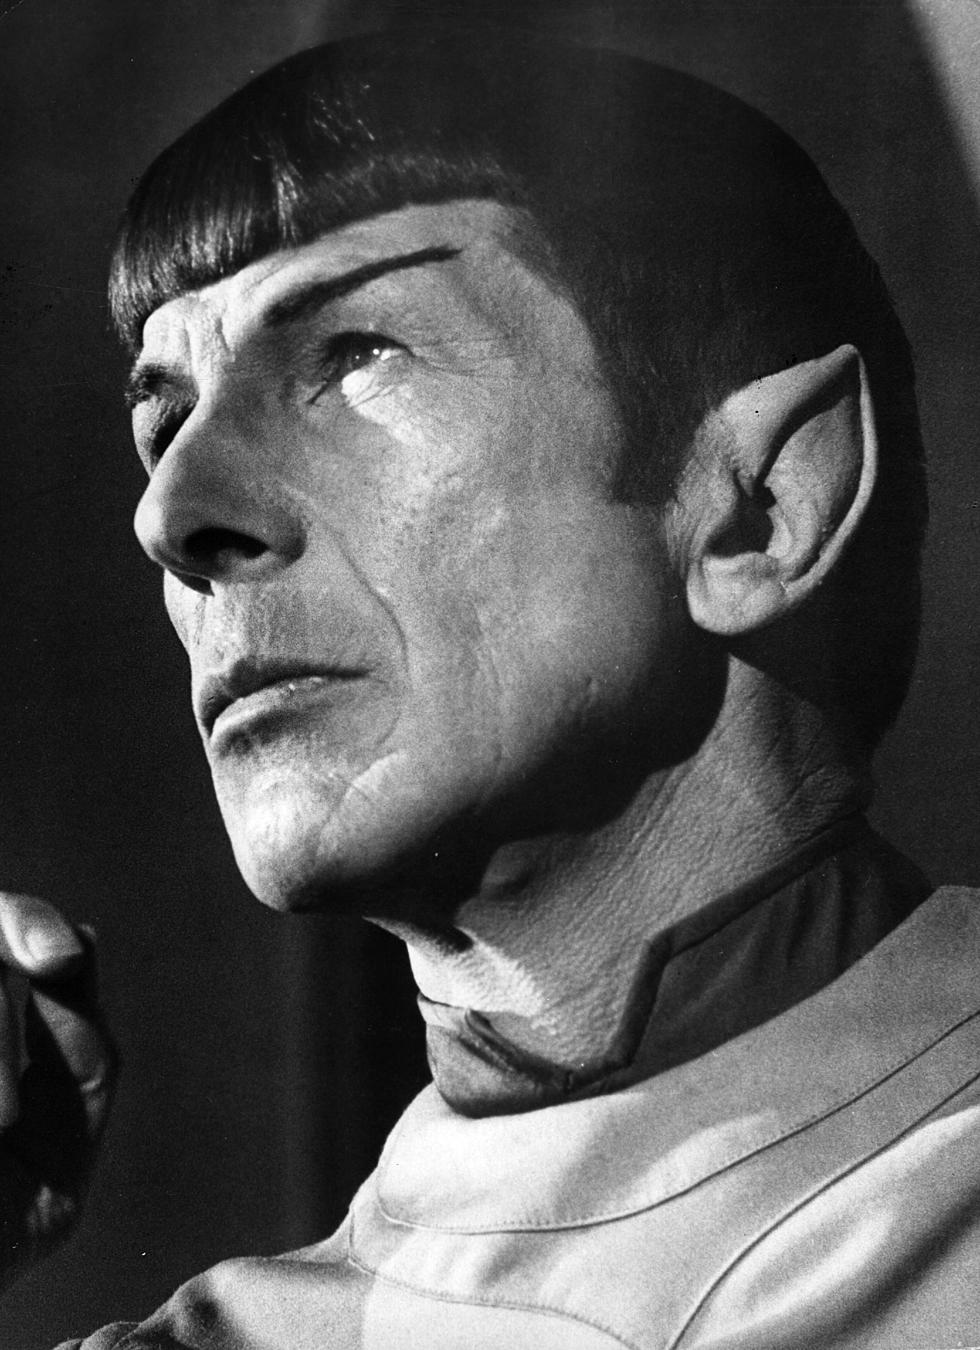 Leonard Nimoy – What ‘Mr. Spock’ Meant to Me